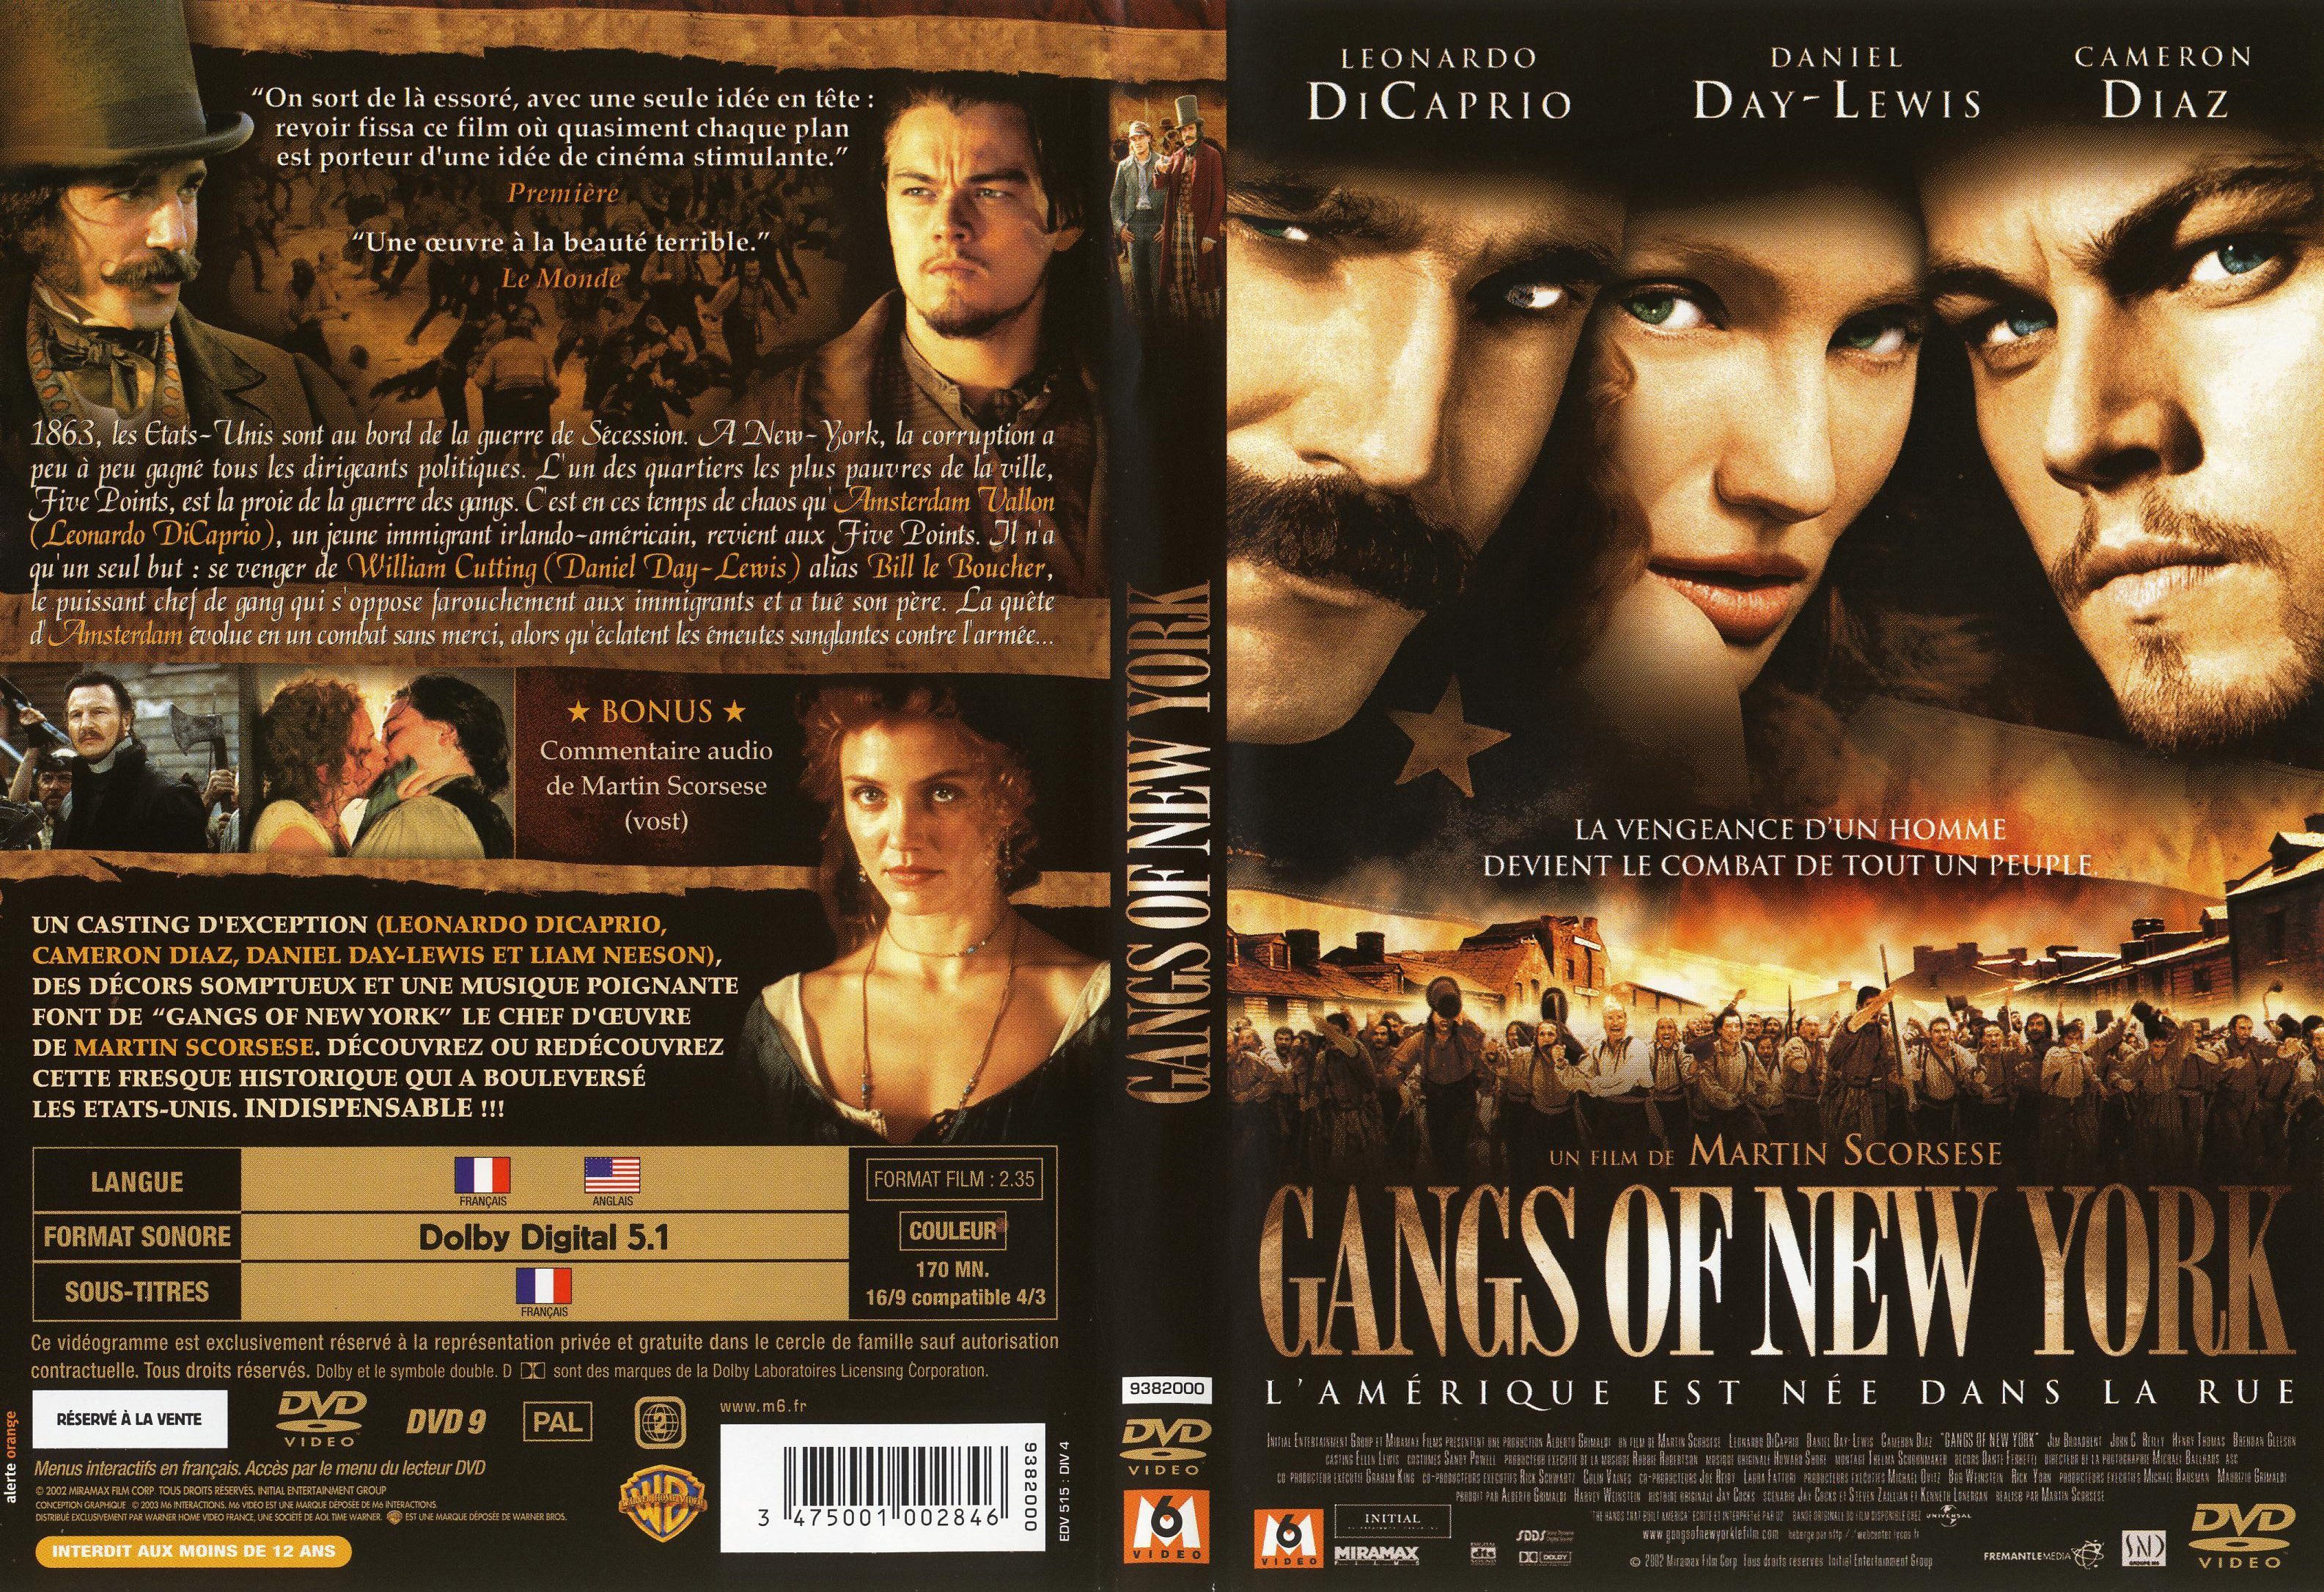 Jaquette DVD Gangs of New York